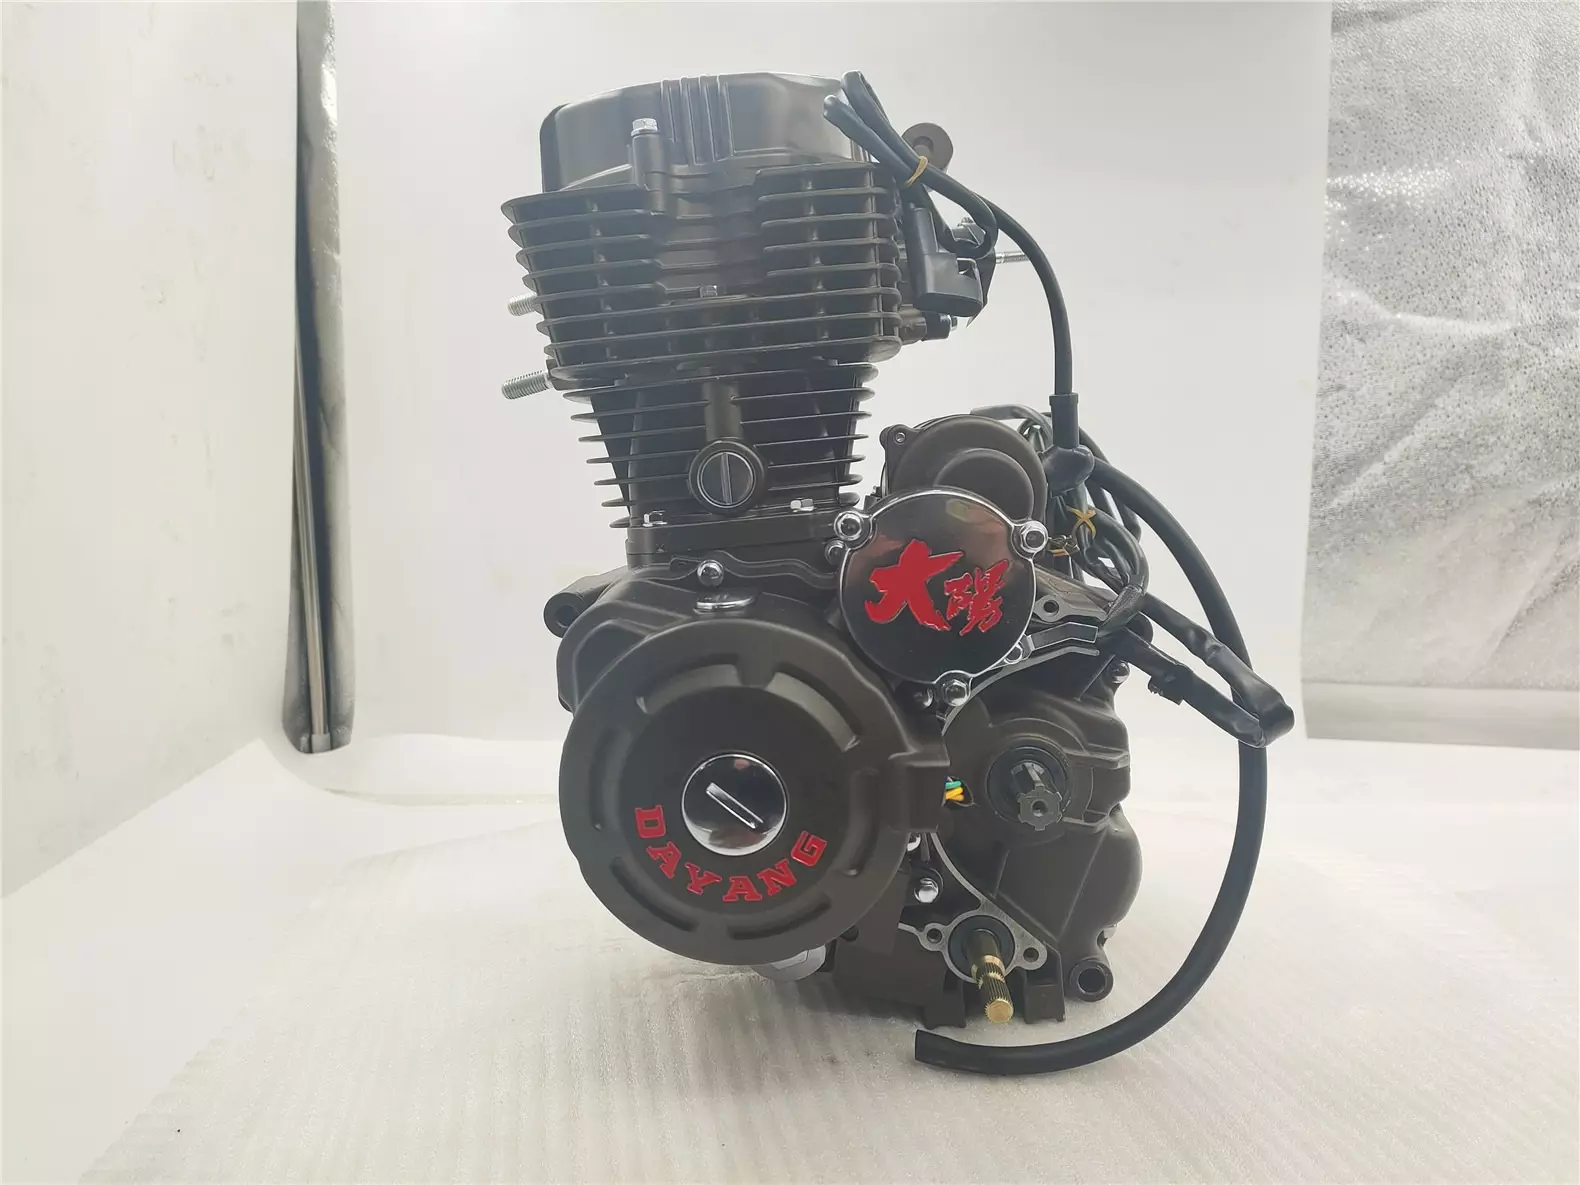 DAYANG Air Cooled CG200 Motorcycle Tricycle Engine Max Black Cylinder Assembly Style Electric/kick Method Origin Warranty